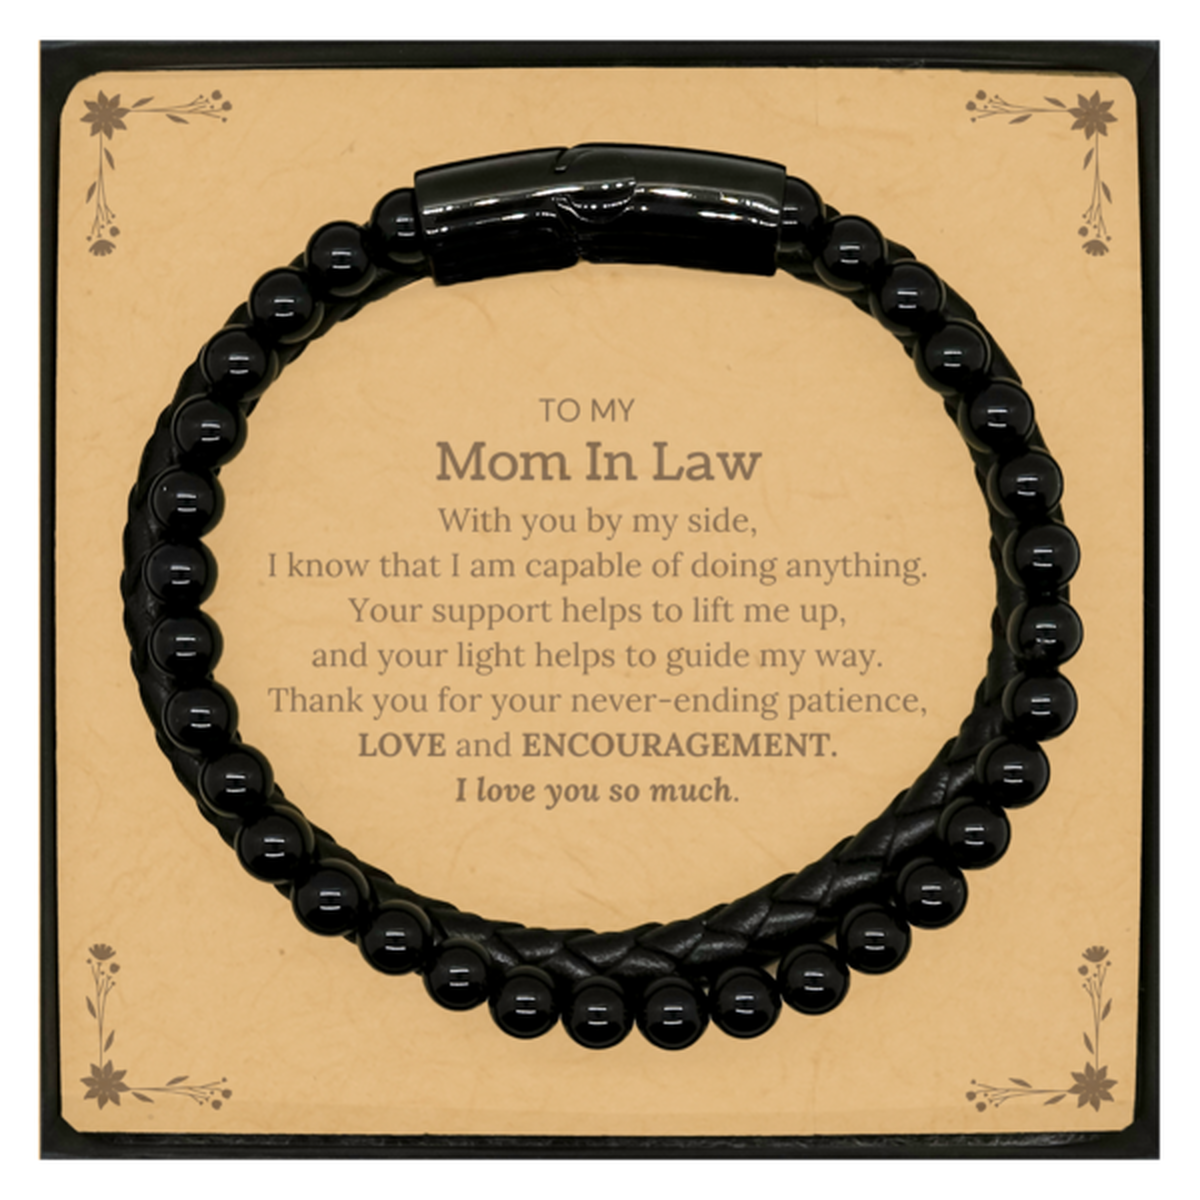 Appreciation Mom In Law Stone Leather Bracelets Gifts, To My Mom In Law Birthday Christmas Wedding Keepsake Gifts for Mom In Law With you by my side, I know that I am capable of doing anything. I love you so much